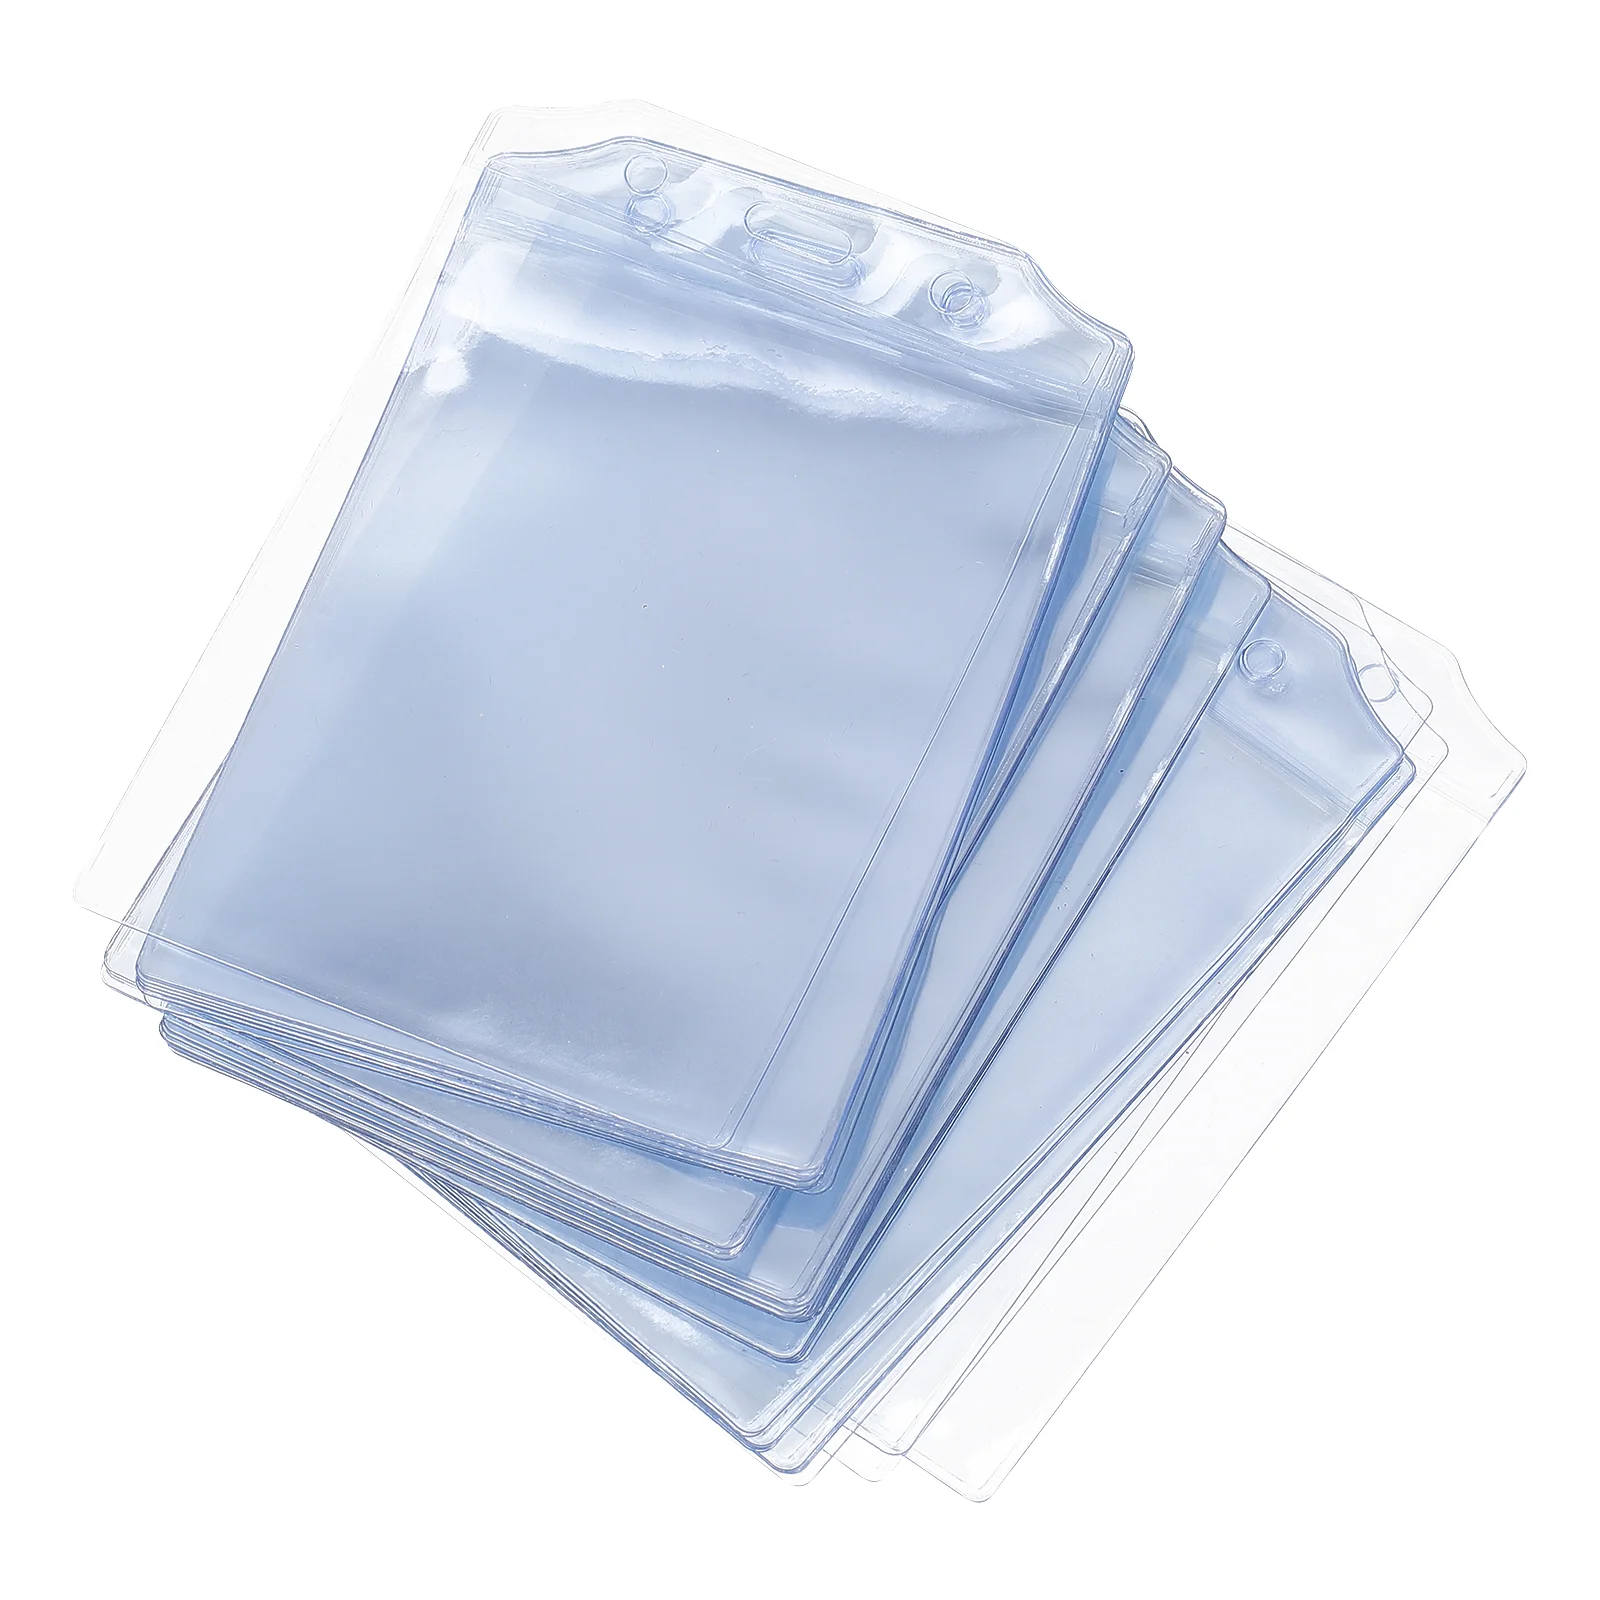 

50 Pcs Card Cover Nurse Lanyard ID Protector Clear Badge Holder Work Cards Pvc Exhibition Certificate Container